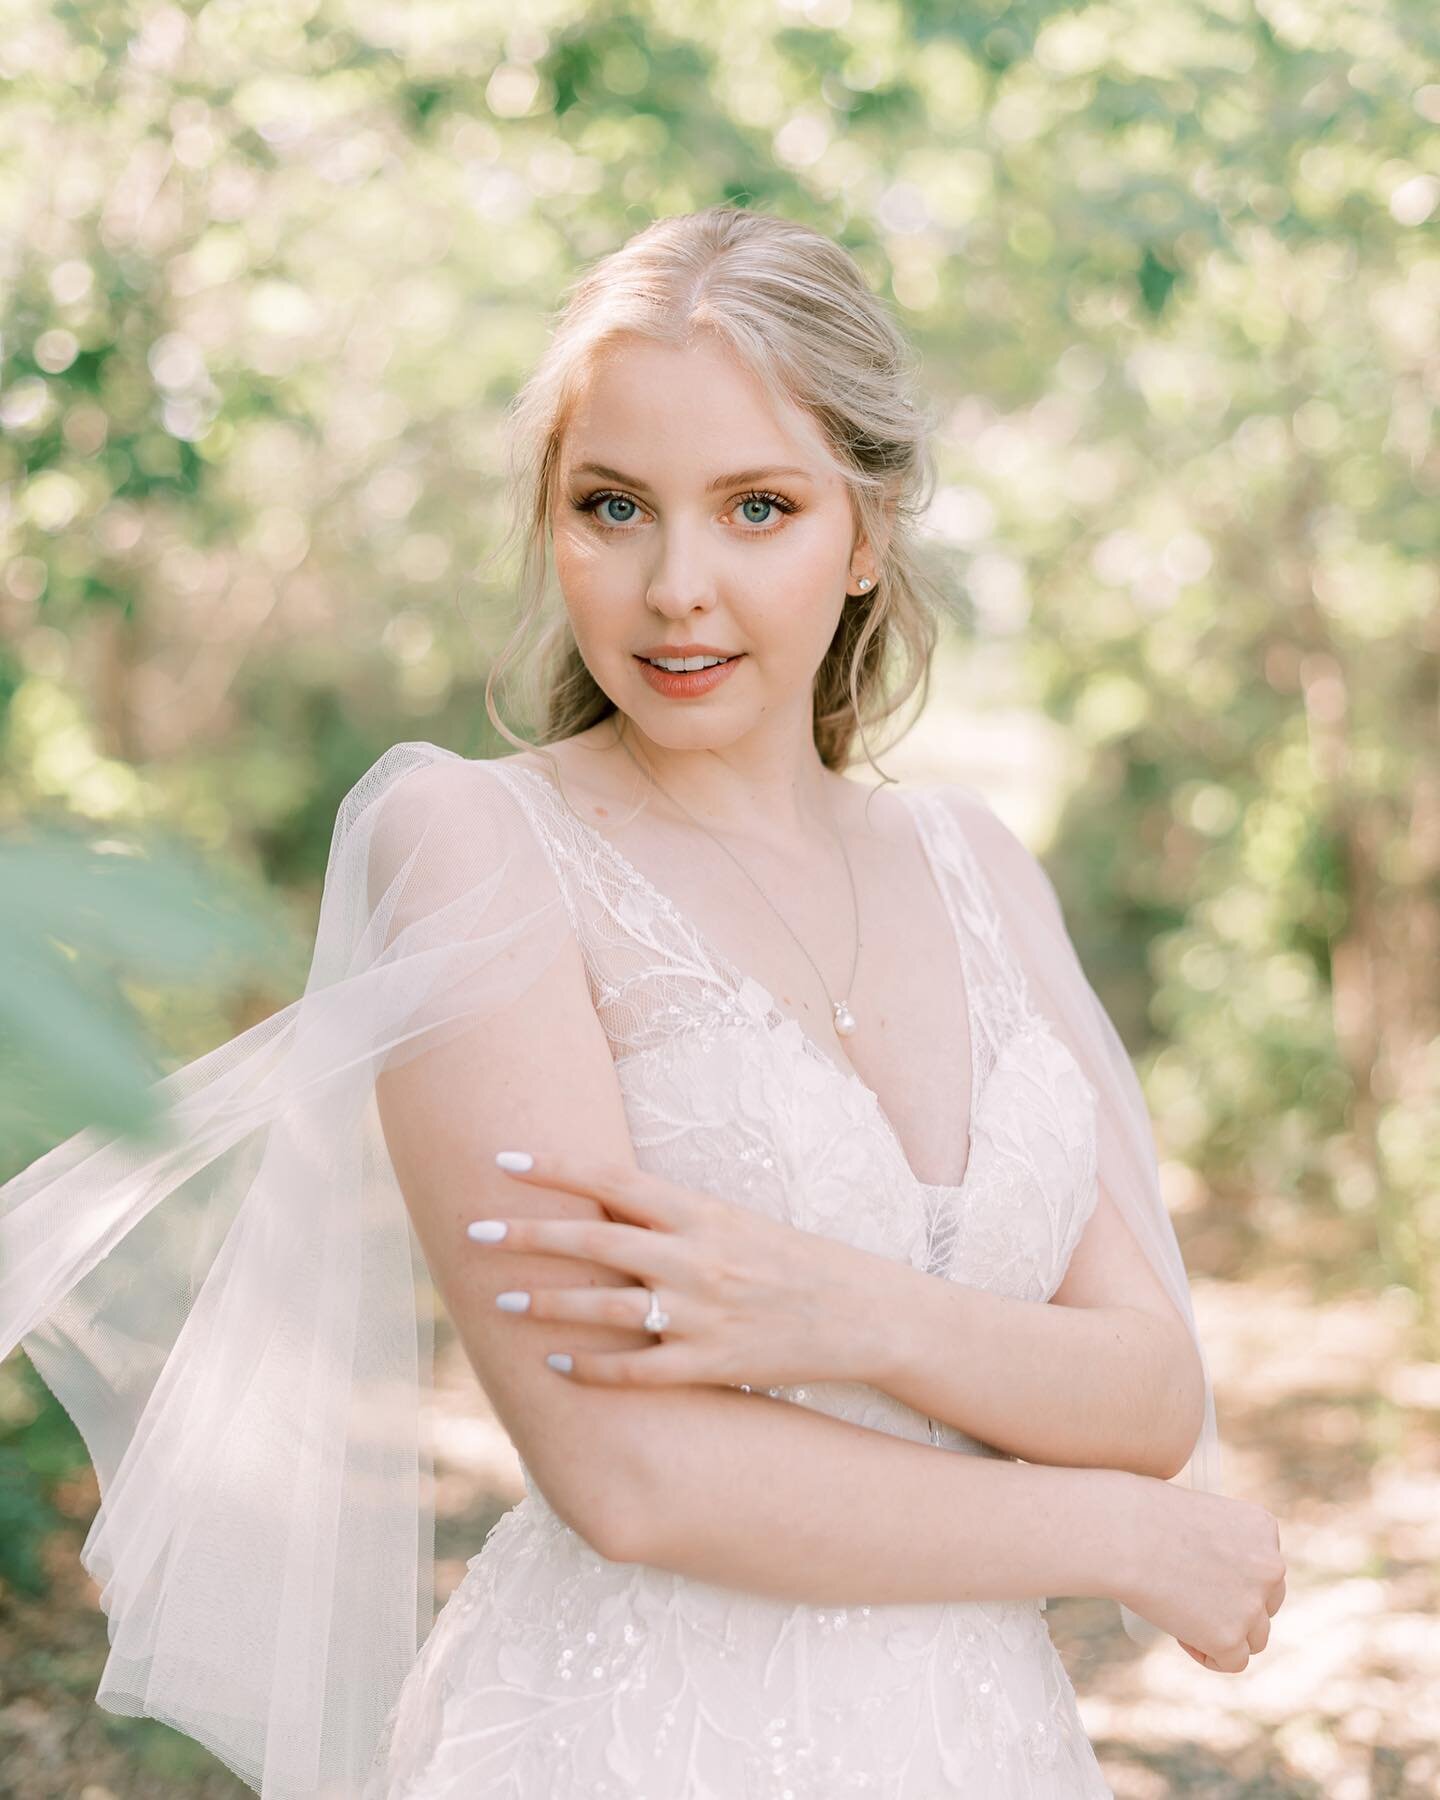 Taylor&rsquo;s vision for her bridal makeup was something natural, whimsical, soft, and fresh - I think we achieved it 😍✨ 

My jaw dropped when I got these photos back. Seriously one of the most gorgeous brides both inside and out! ✨

Photographer: 